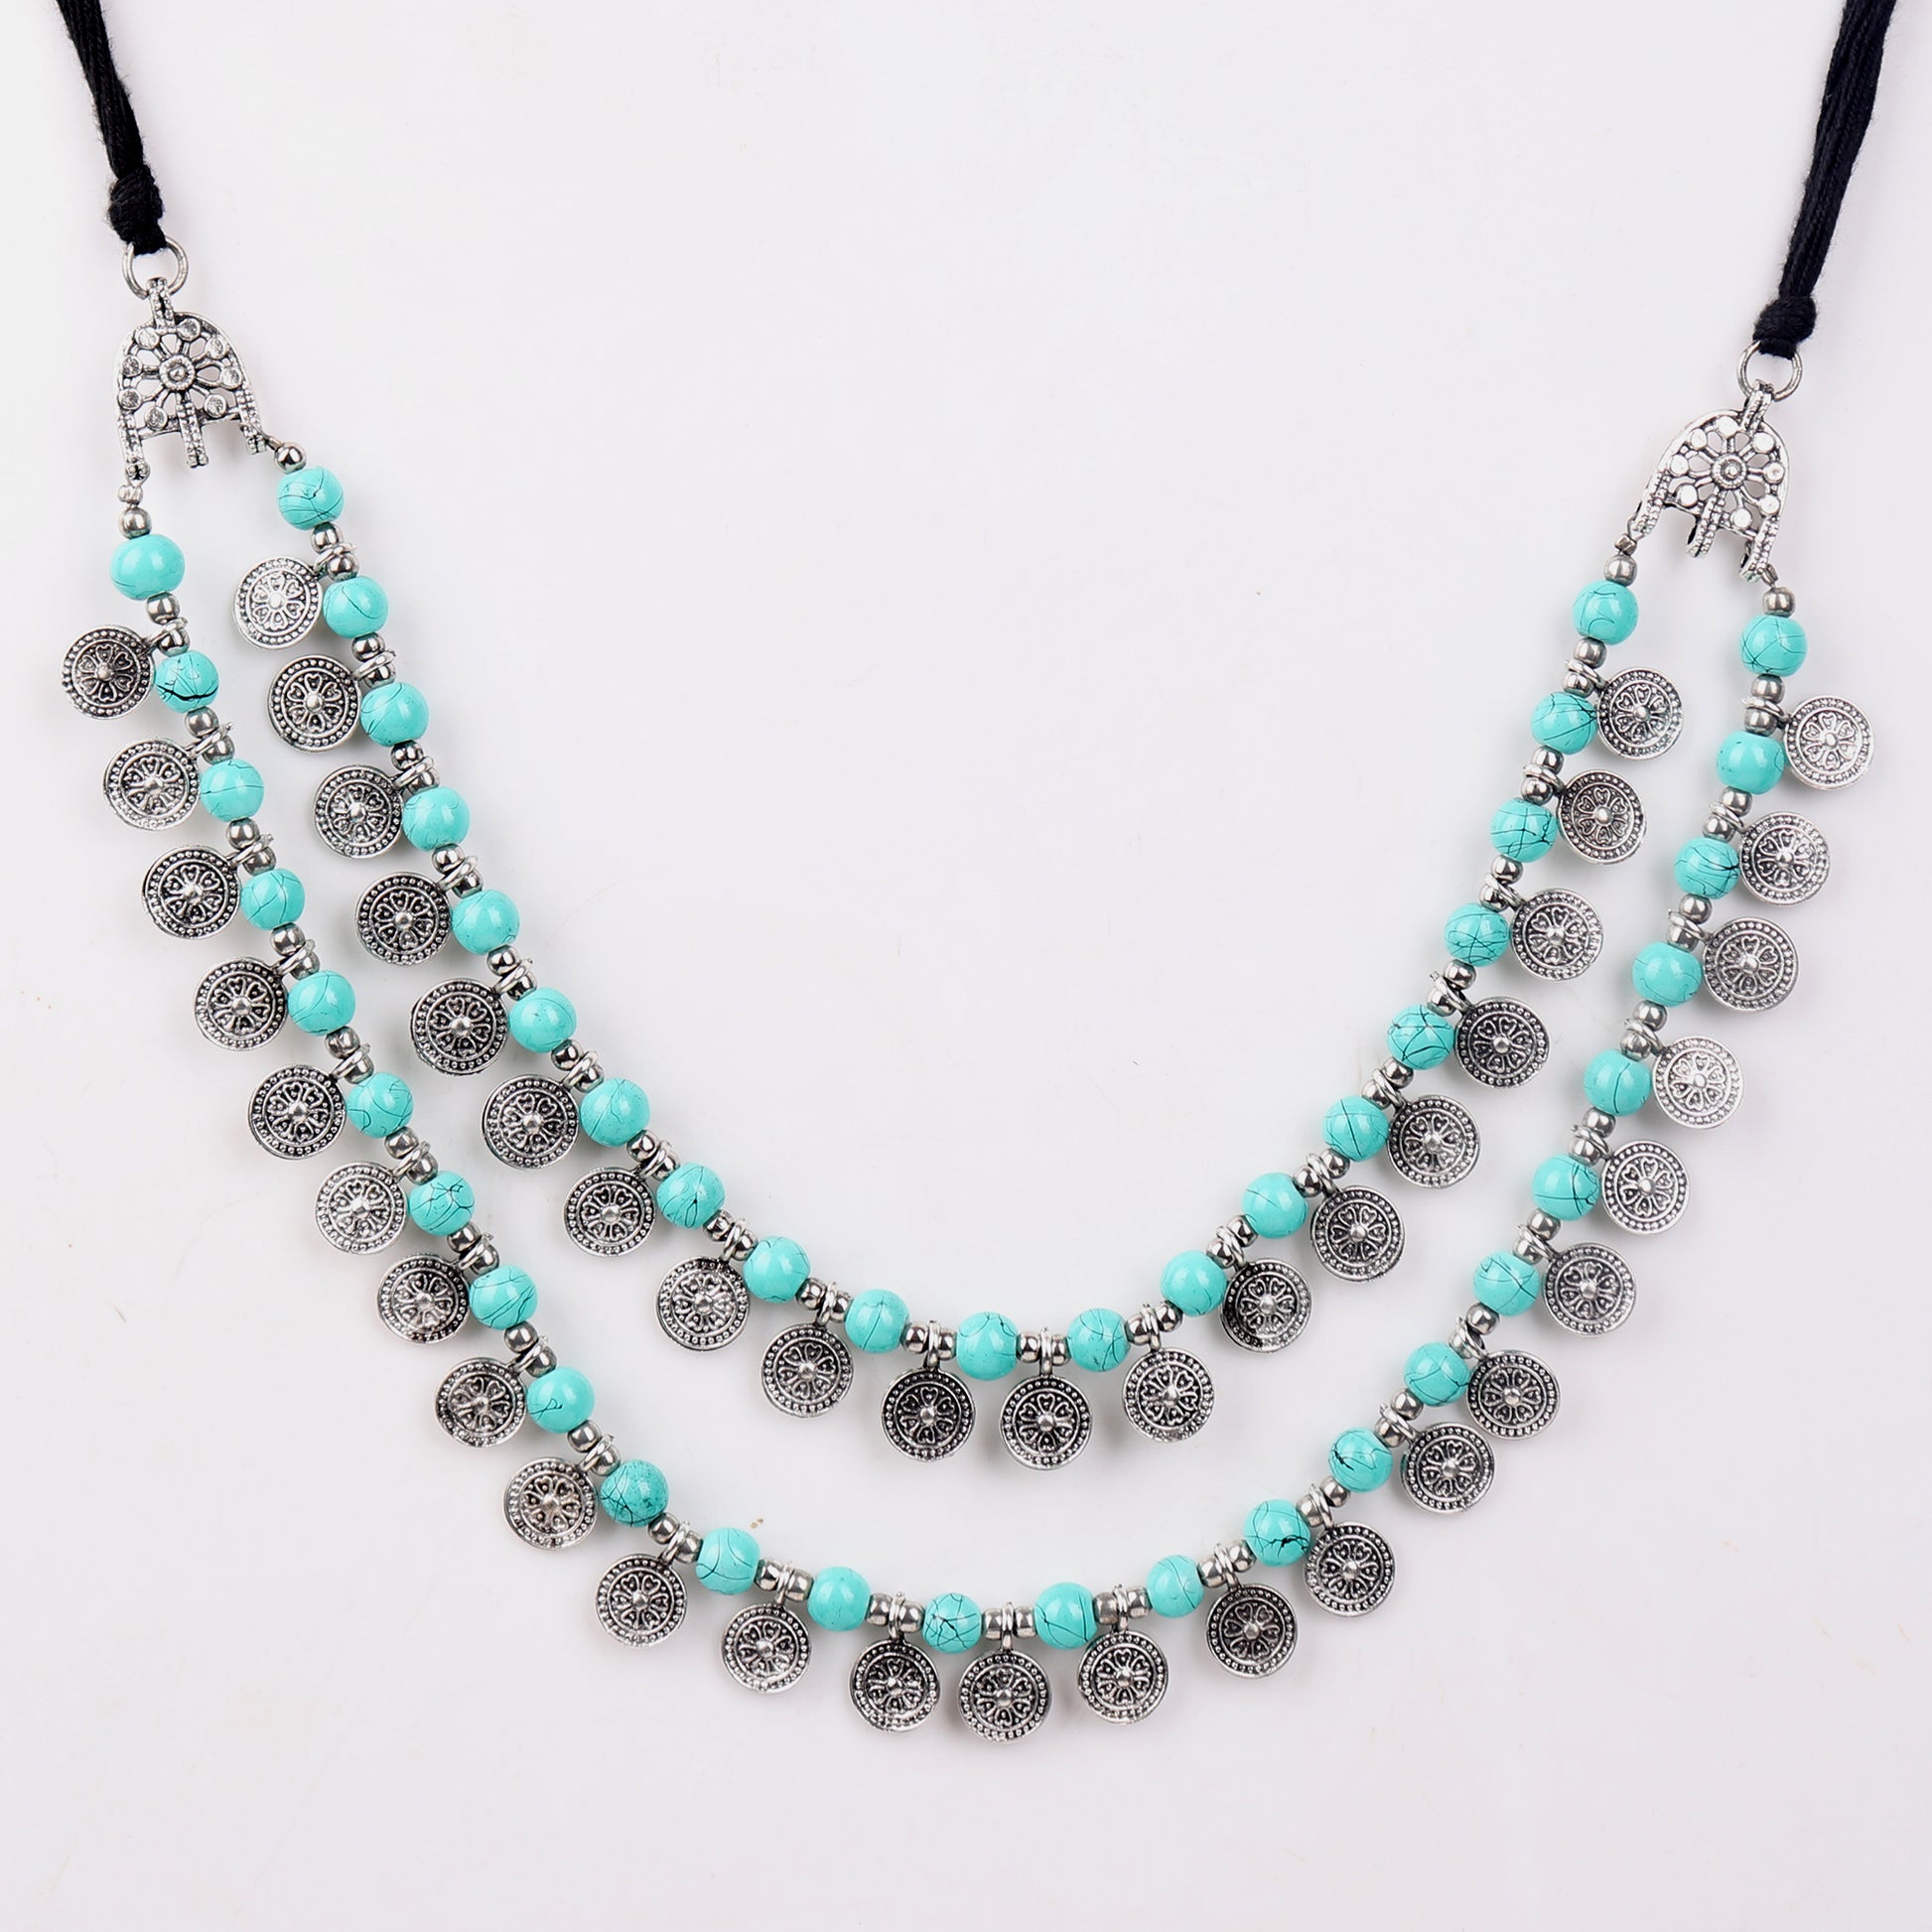 Necklace,Layered Necklace with Jade Green Beads - Cippele Multi Store